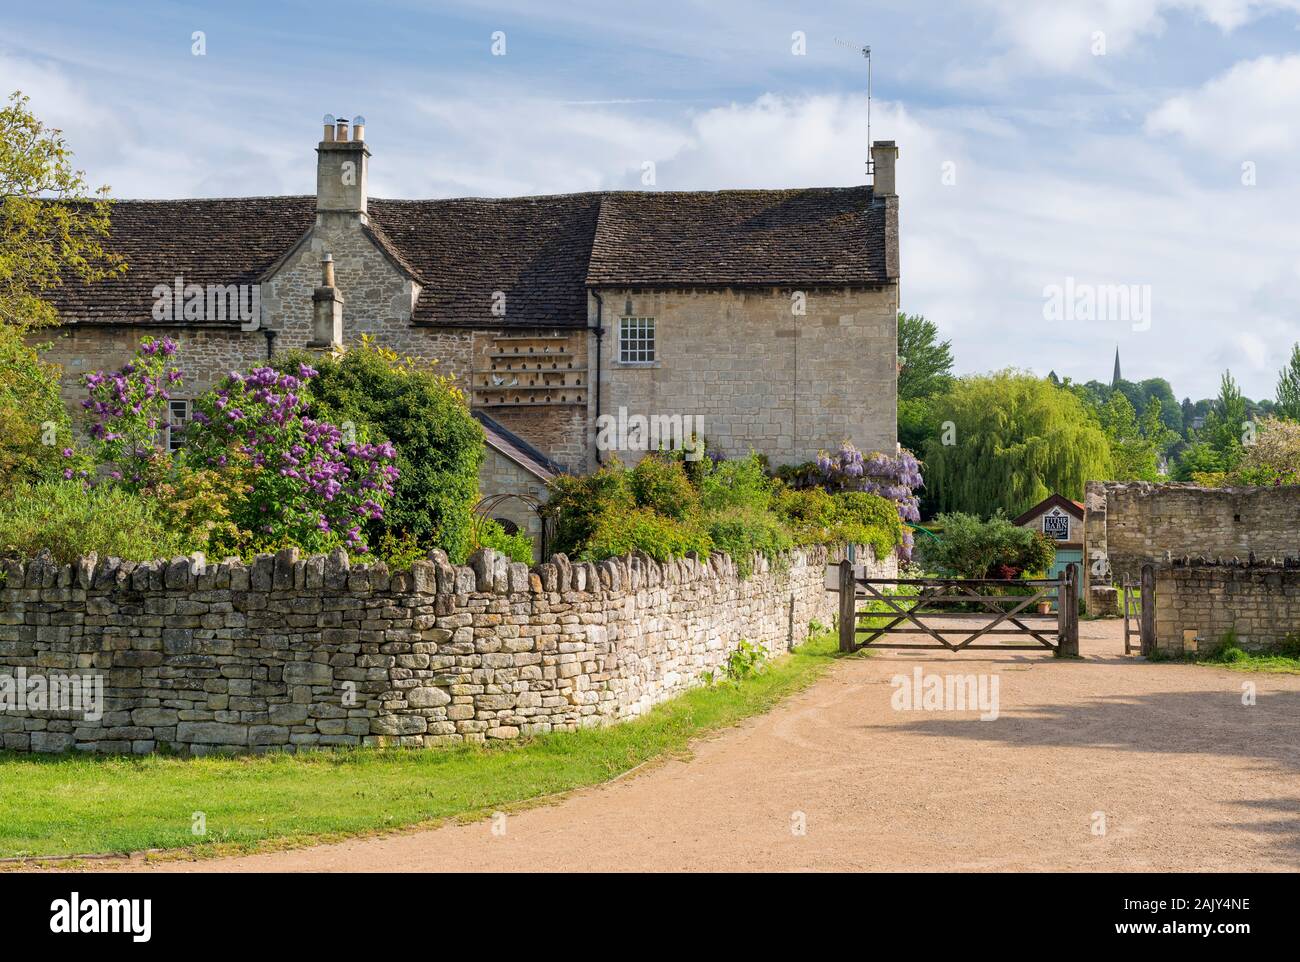 Buildings which are part of the Ancient Barton Farm in Bradford On Avon, Wiltshire, UK Stock Photo